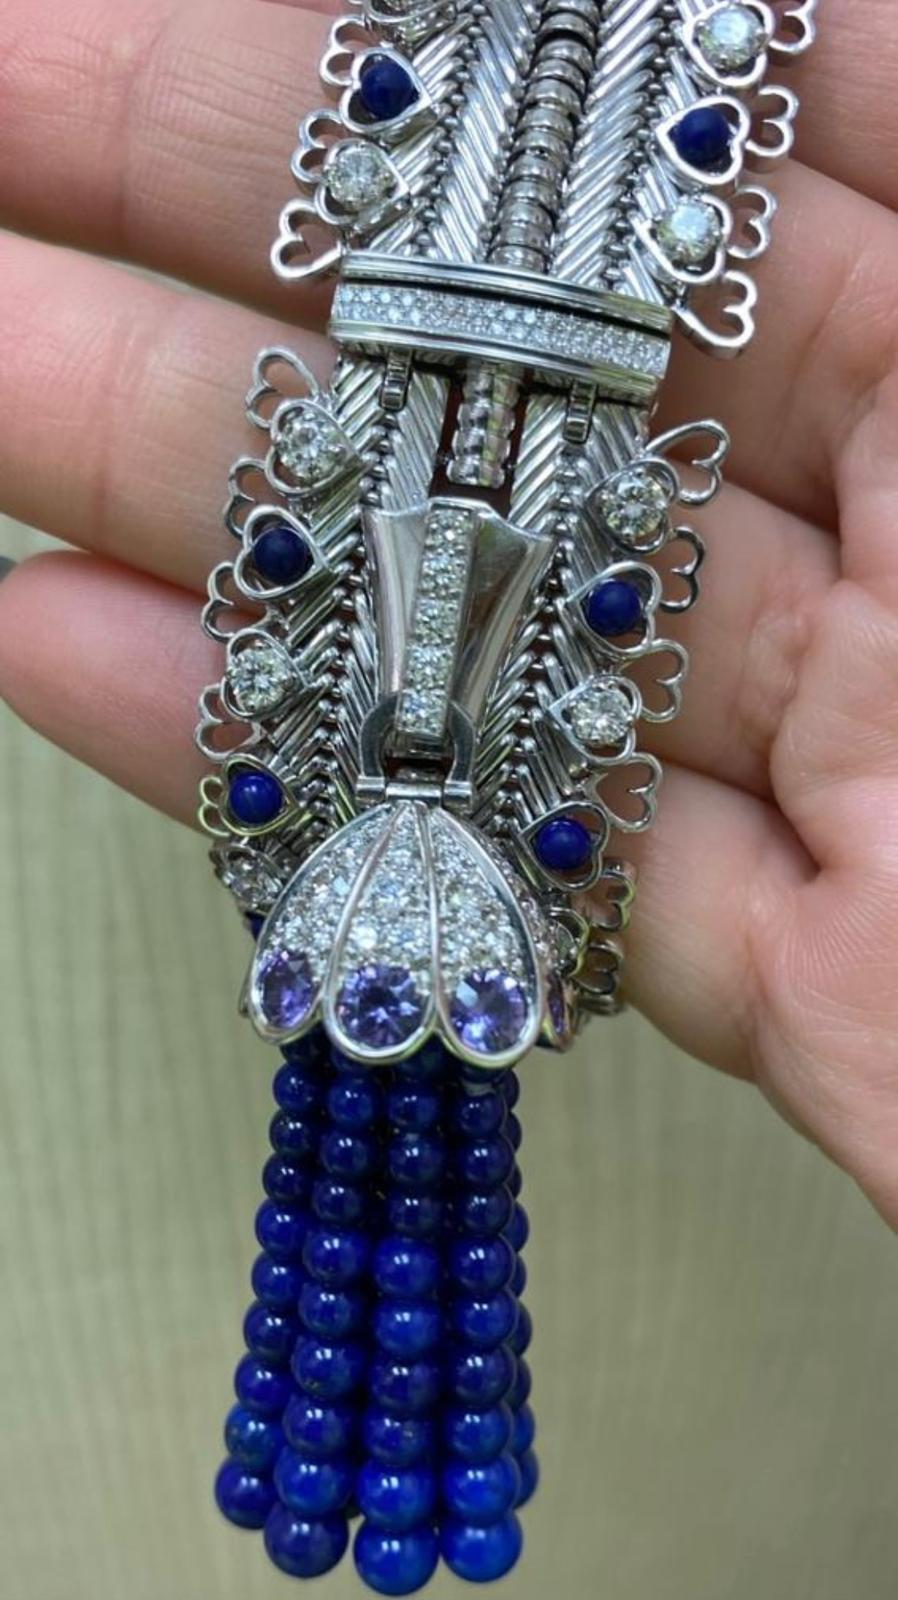 Originally created in 1950 for the Dutchess of Windsor, the Zip necklace has since been an icon of the maison.

Zip Antique Coupoles Necklace, one of a kind, 18k white gold, round diamonds, mauve sapphires, lapis lazuli beads and cabochon. Fully